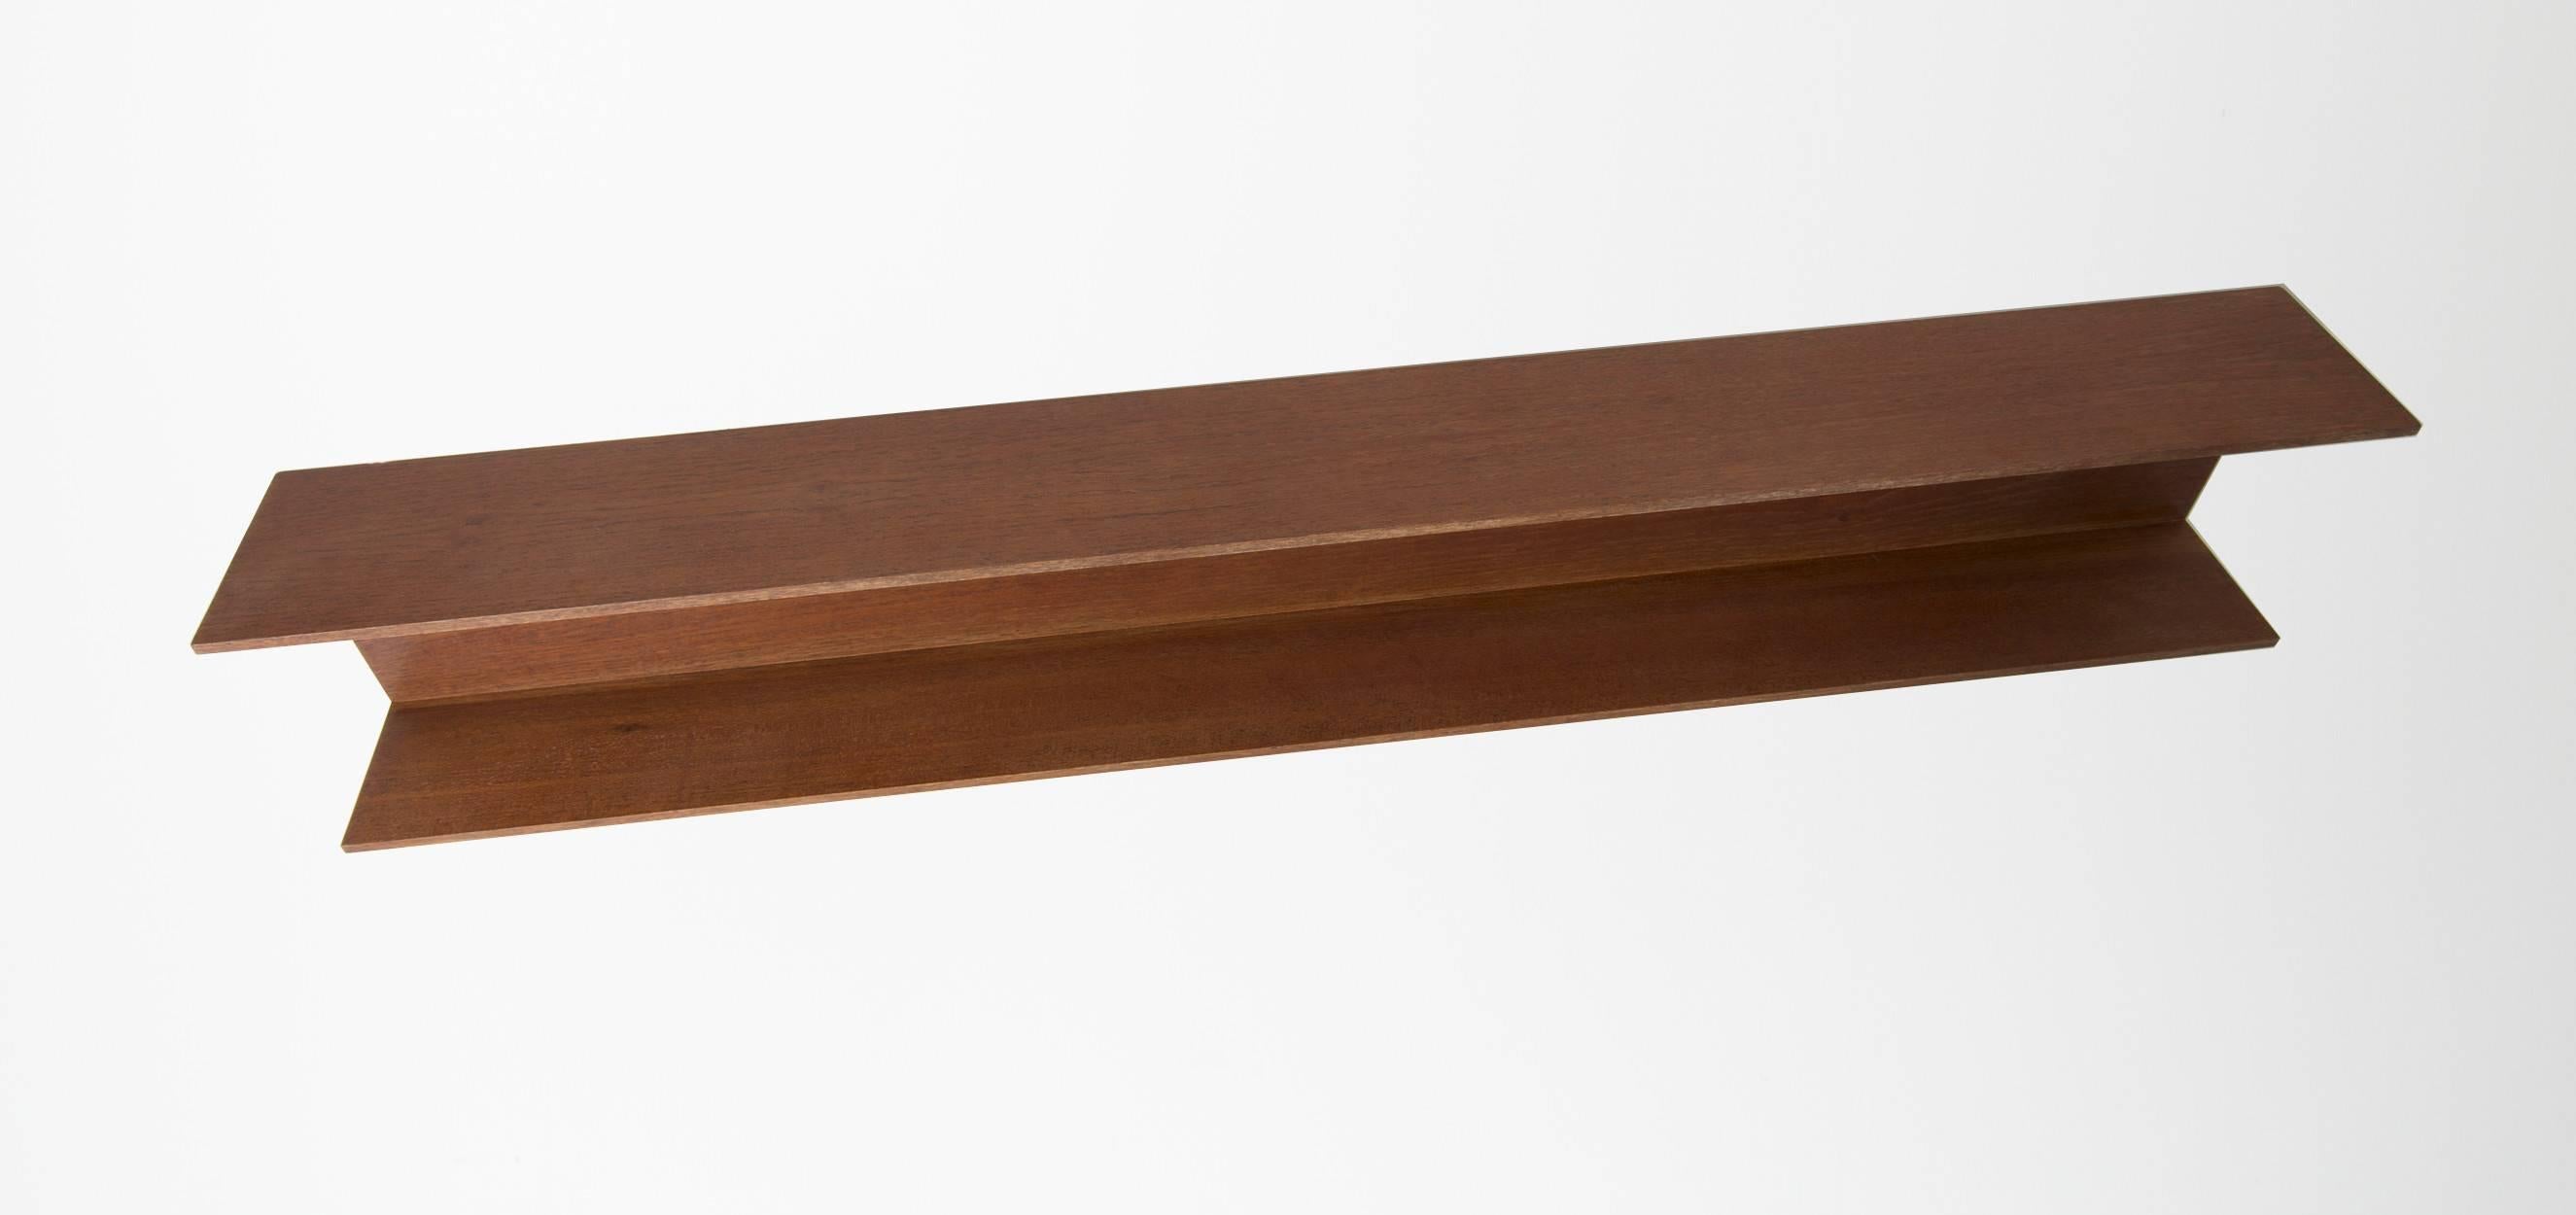 Walter Wirz wall shelf produced in 1965. This wall shelf is designed by Walter Wirz for the German company Wilhelm Renz.

Wilhelm Renz took over the company in 1902 that Otto Vetter had started in the early 80s. More than 10 years later, Wilhelm